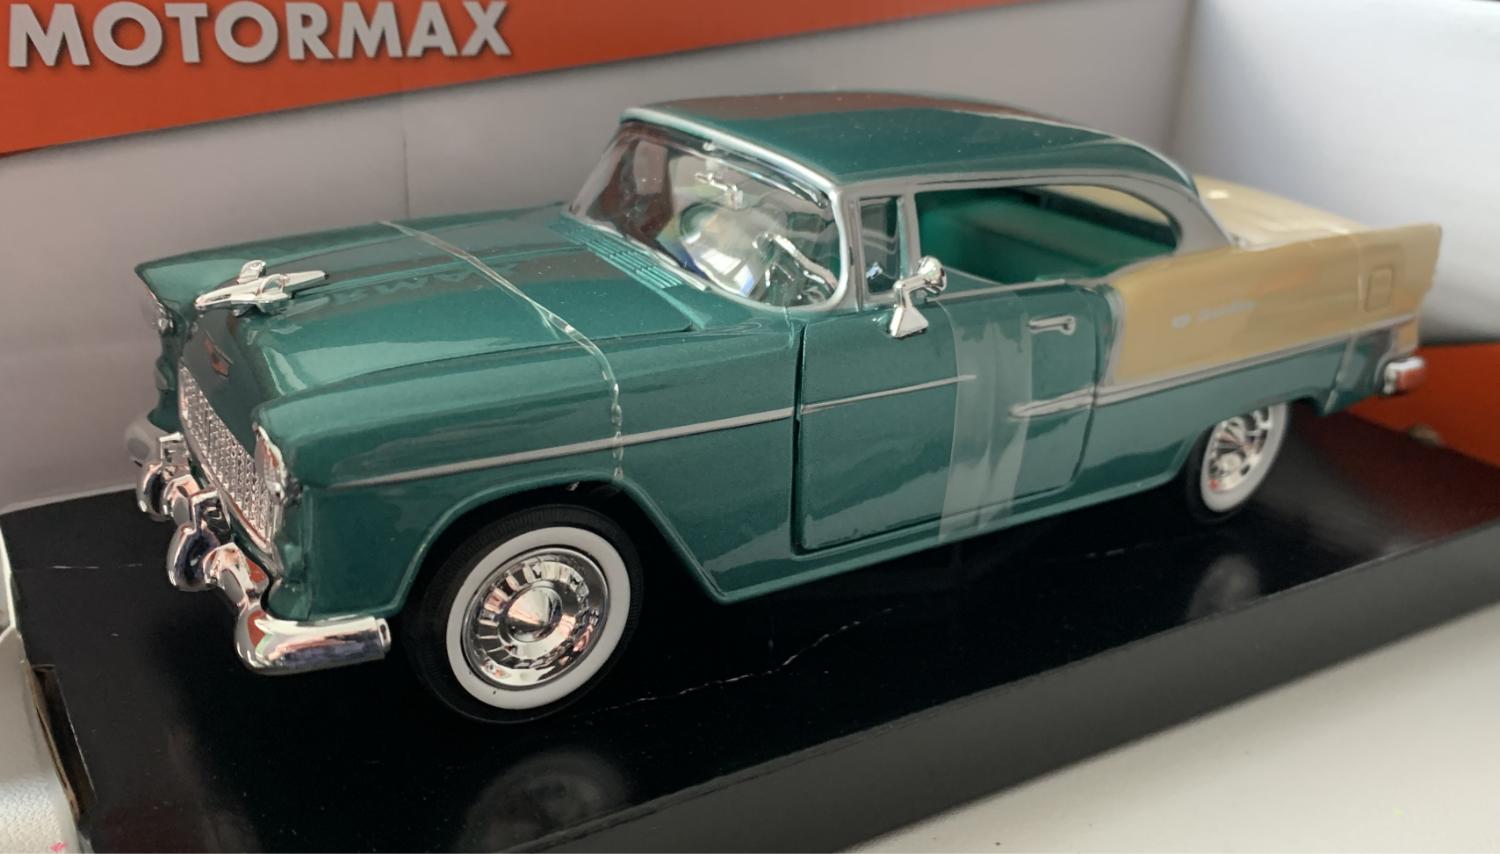 Chevrolet Bel Air Hard Top 1955 in green and beige 1:24 scale model from motormax